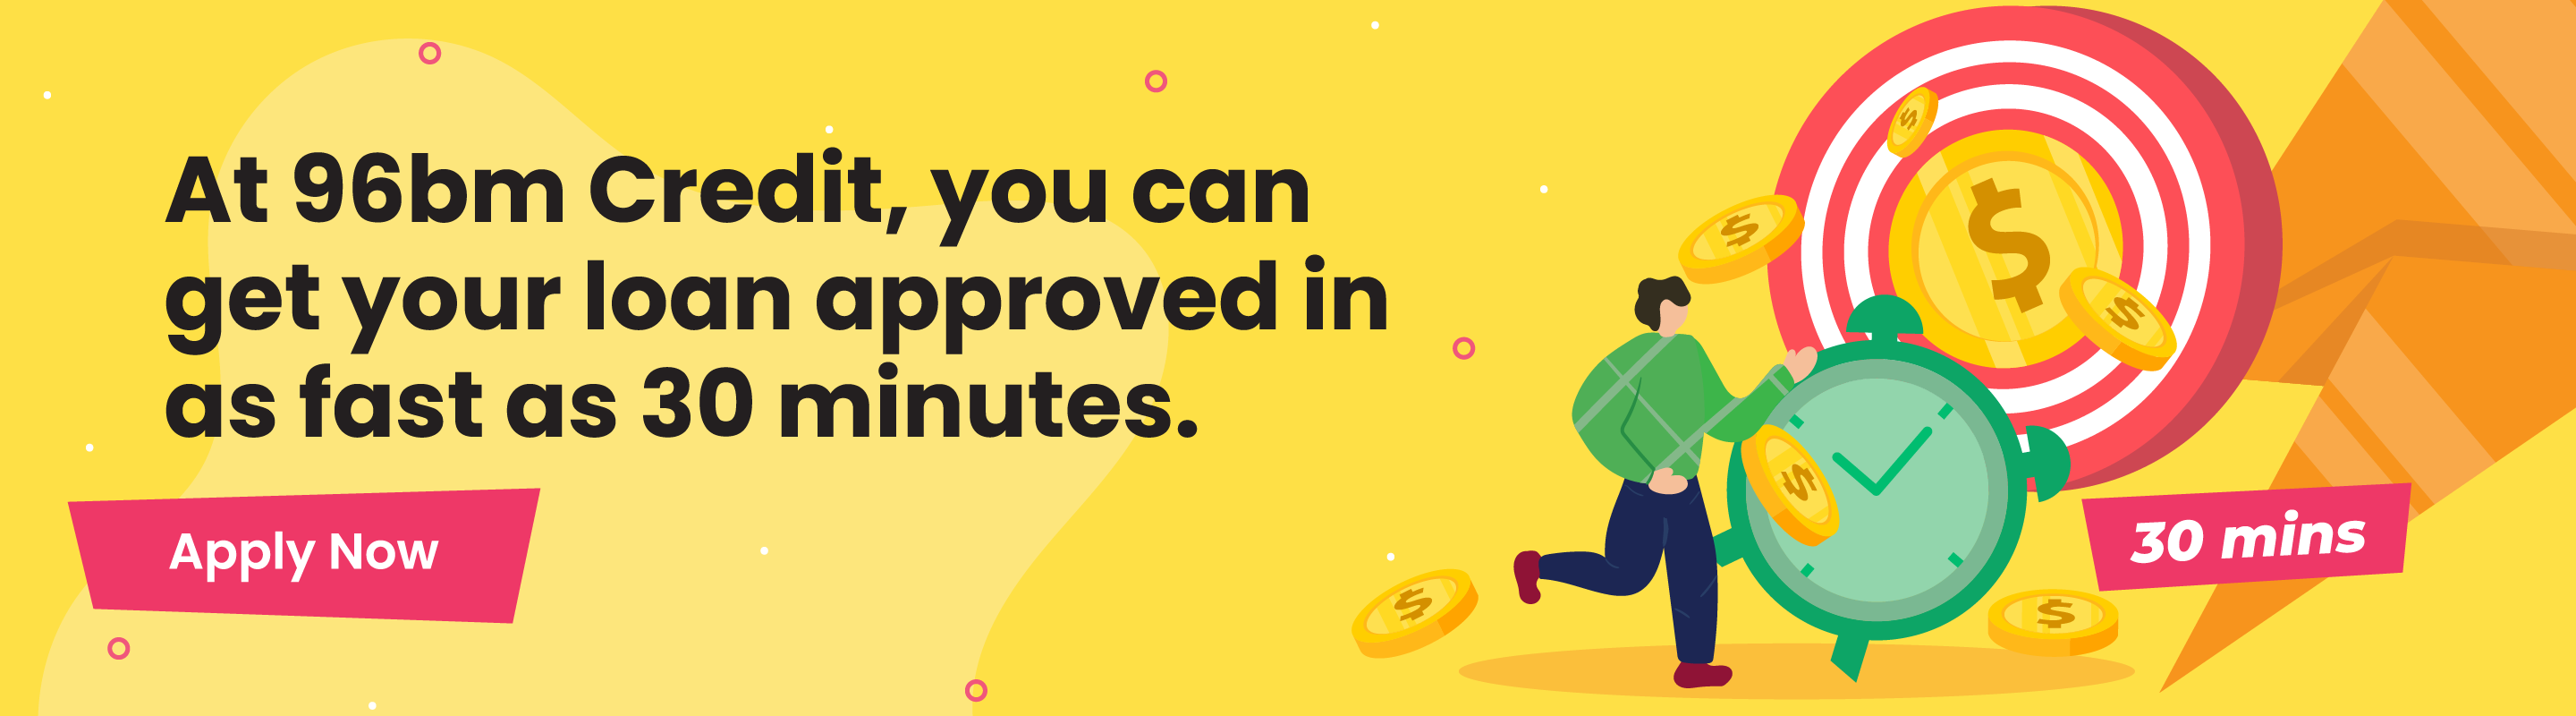 At 96bm Credit you can get your loan approved in as fast as 30 minutes